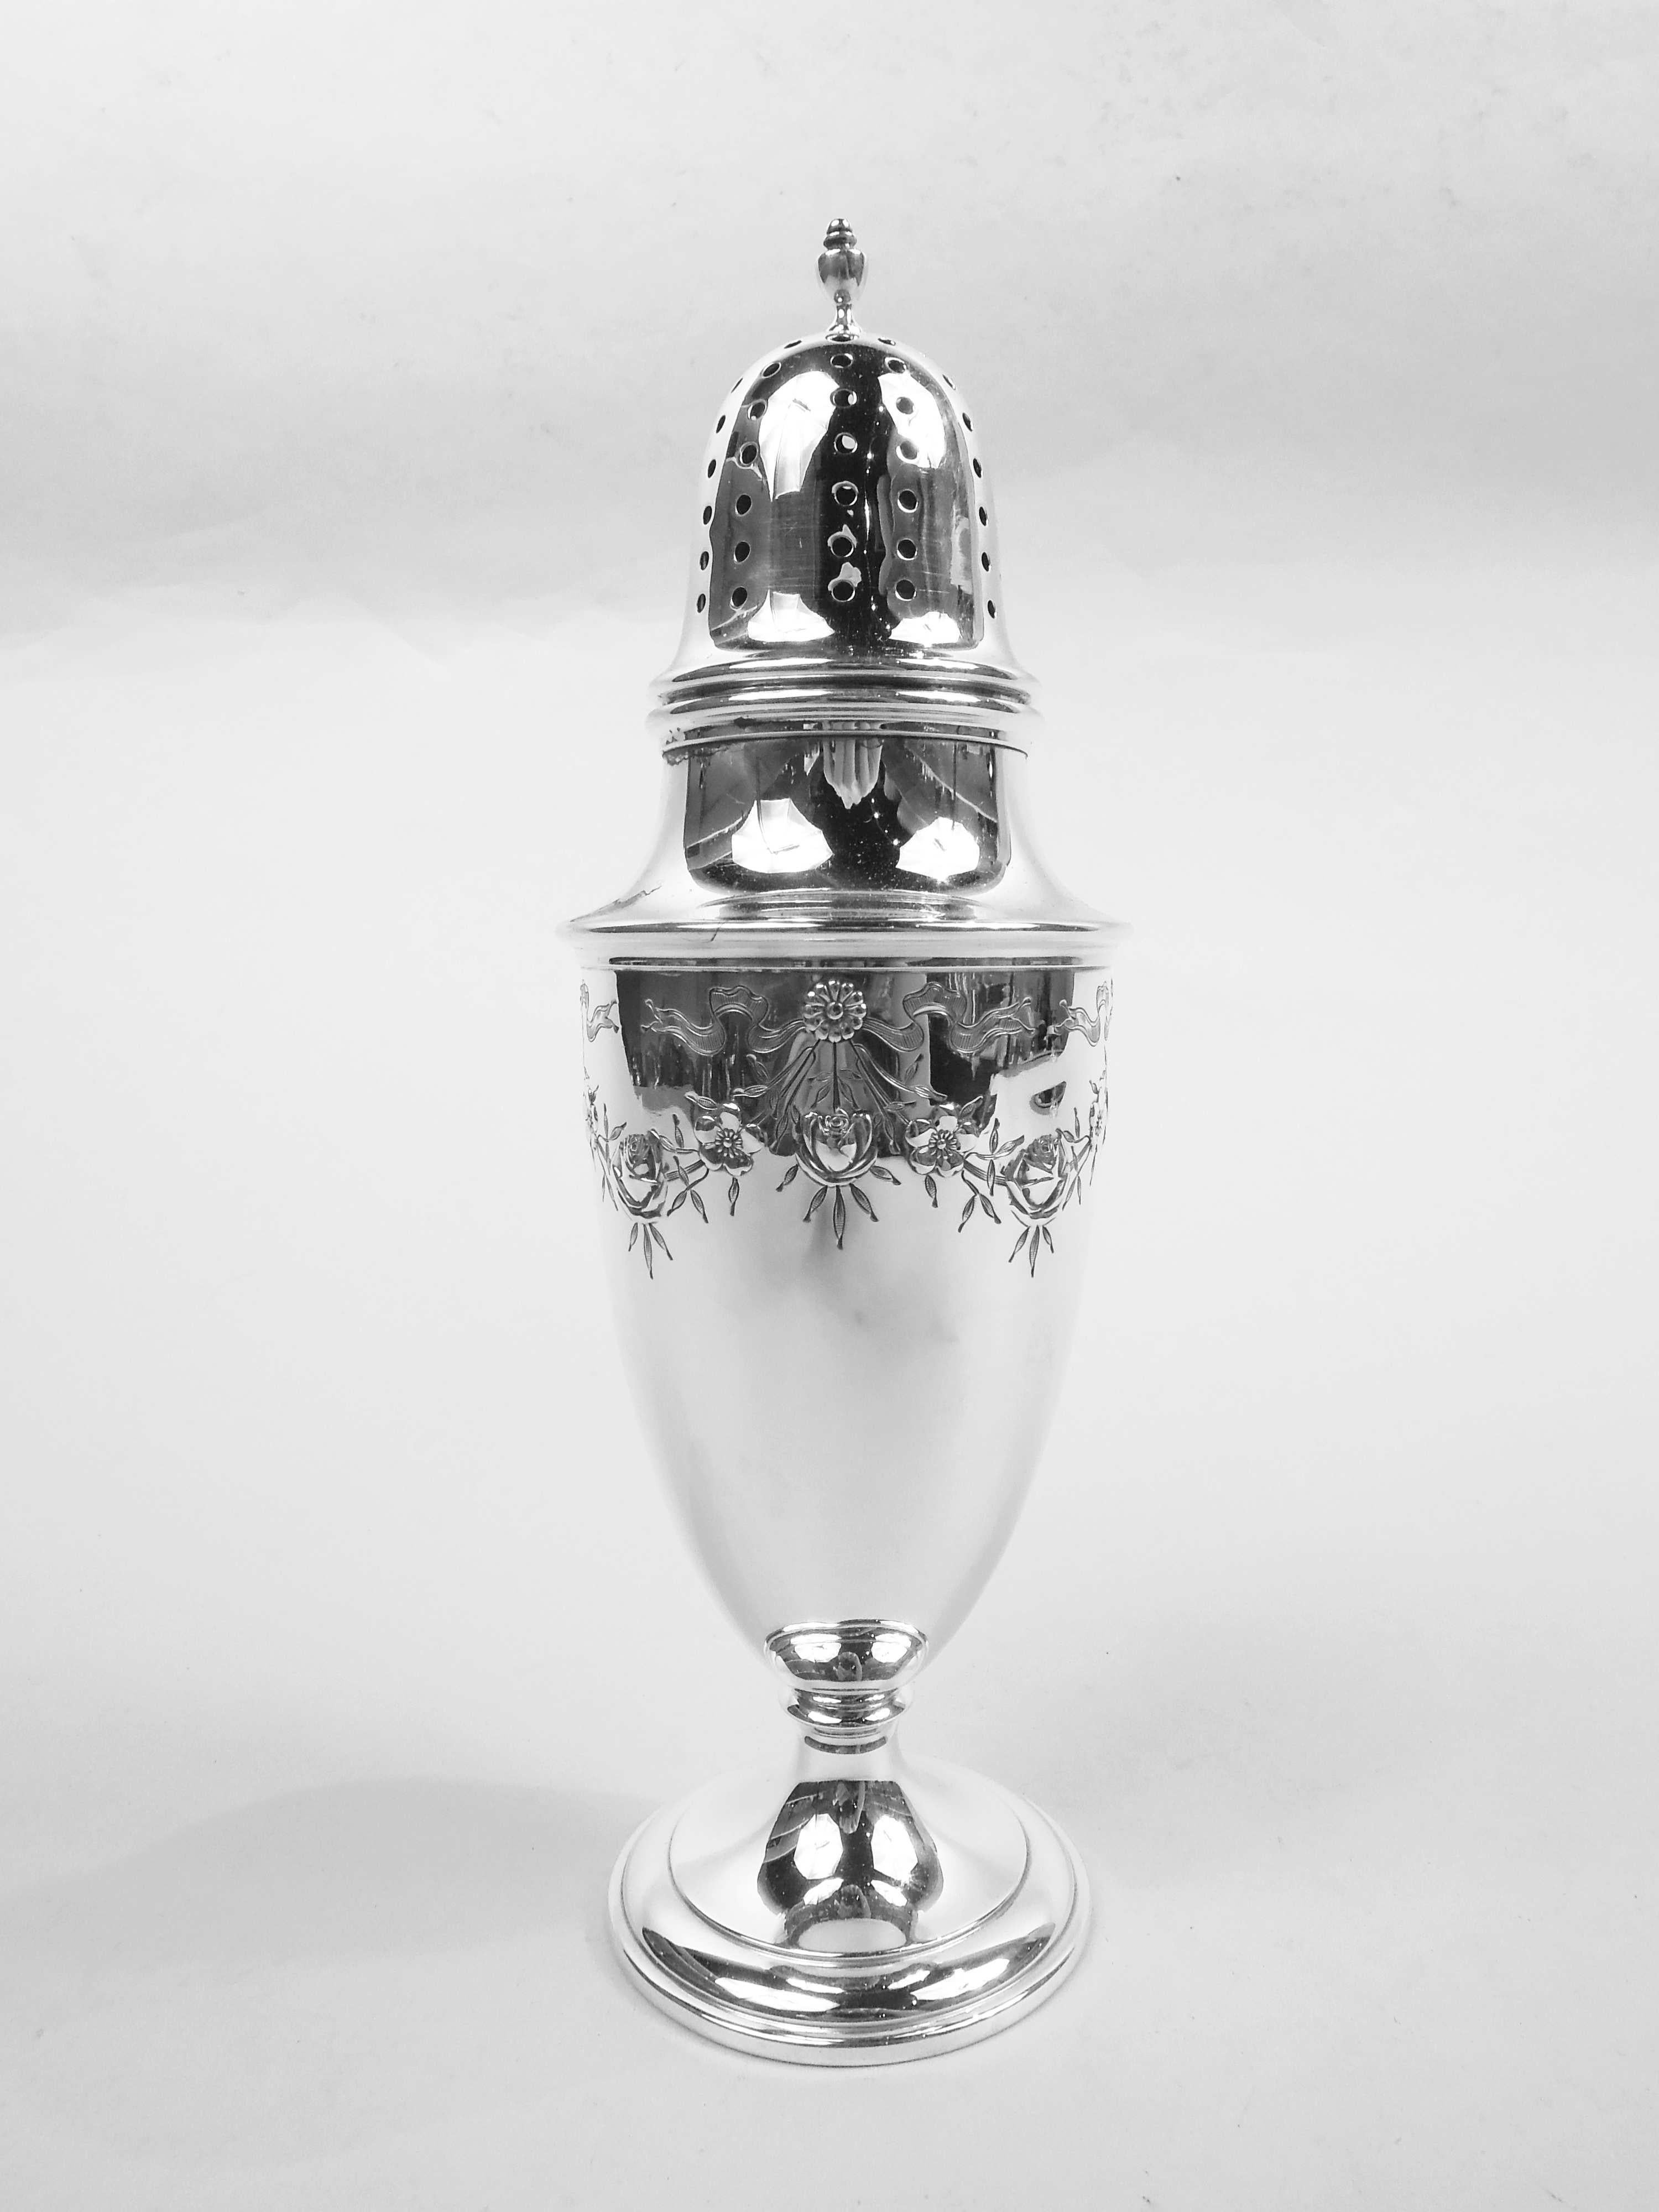 Edwardian Regency sterling silver sugar caster. Made by Whiting Manufacturing Co. in 1917. Ovoid bowl on stepped and raised foot. Cover domed and pierced with vasiform finial. Engraved and chased ribboned paterae with pendant garland. Fully marked